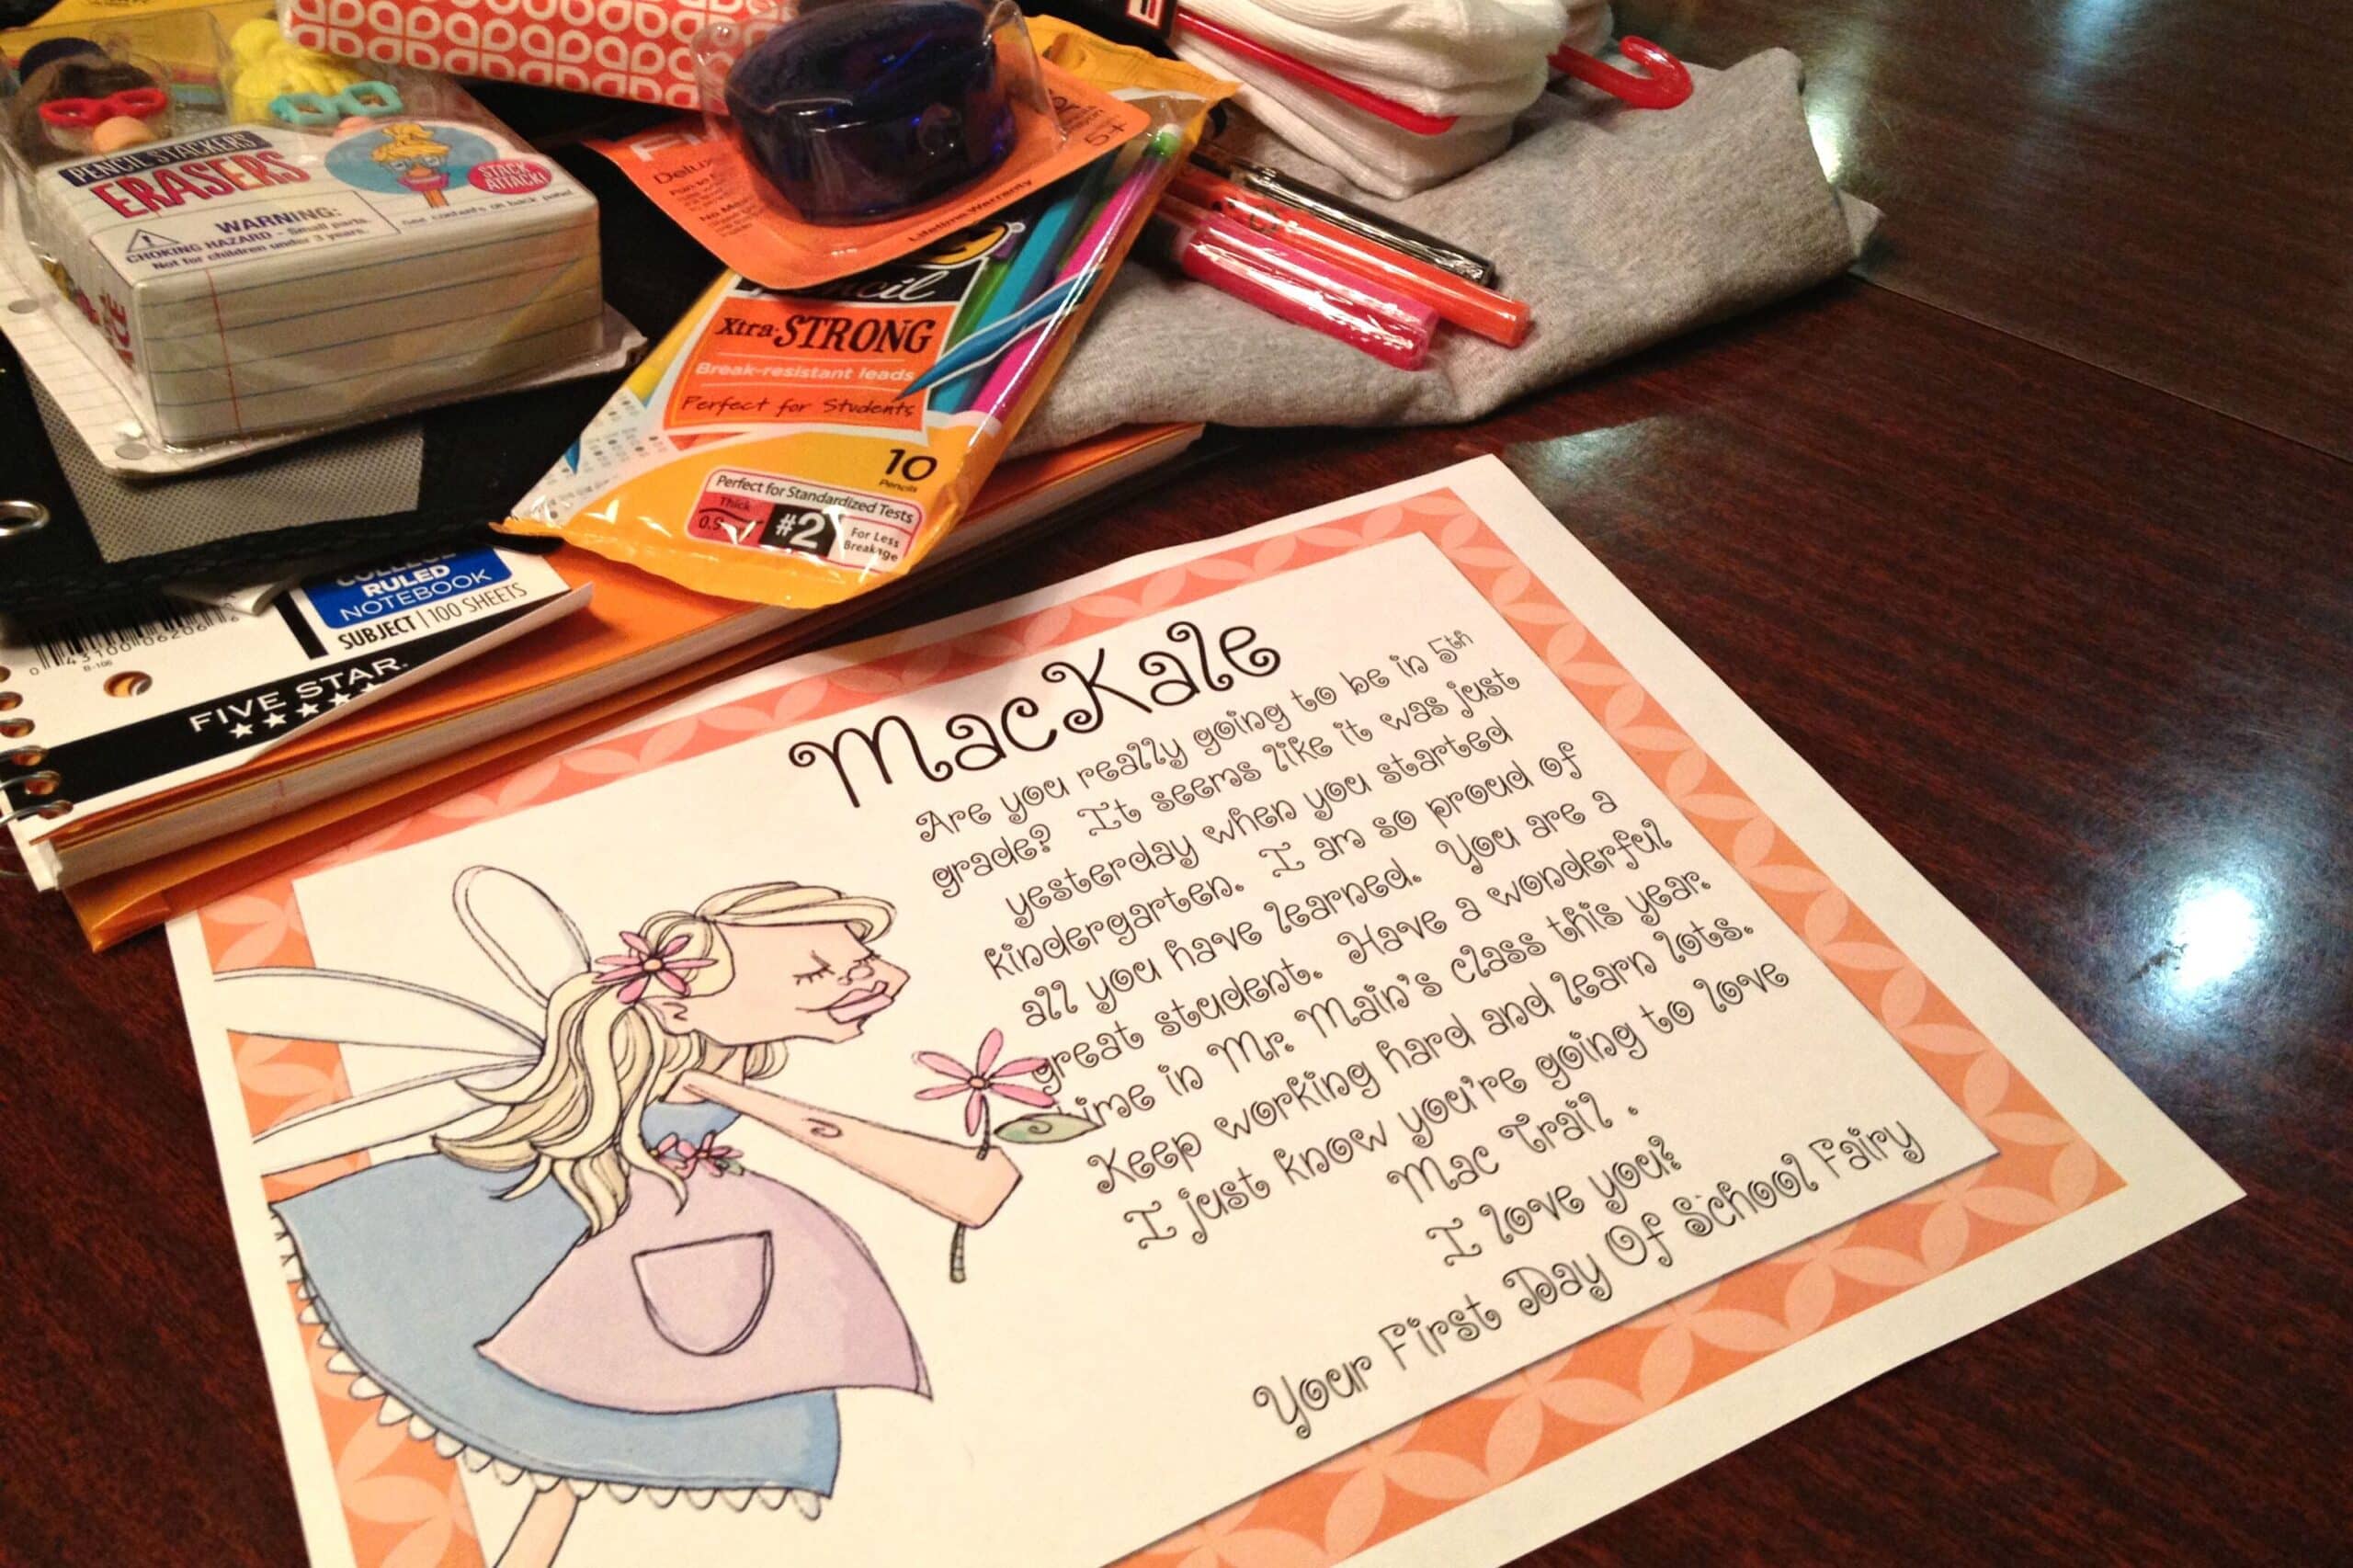 A first day of school tradition involving a fairy and school supplies | The Dating Divas